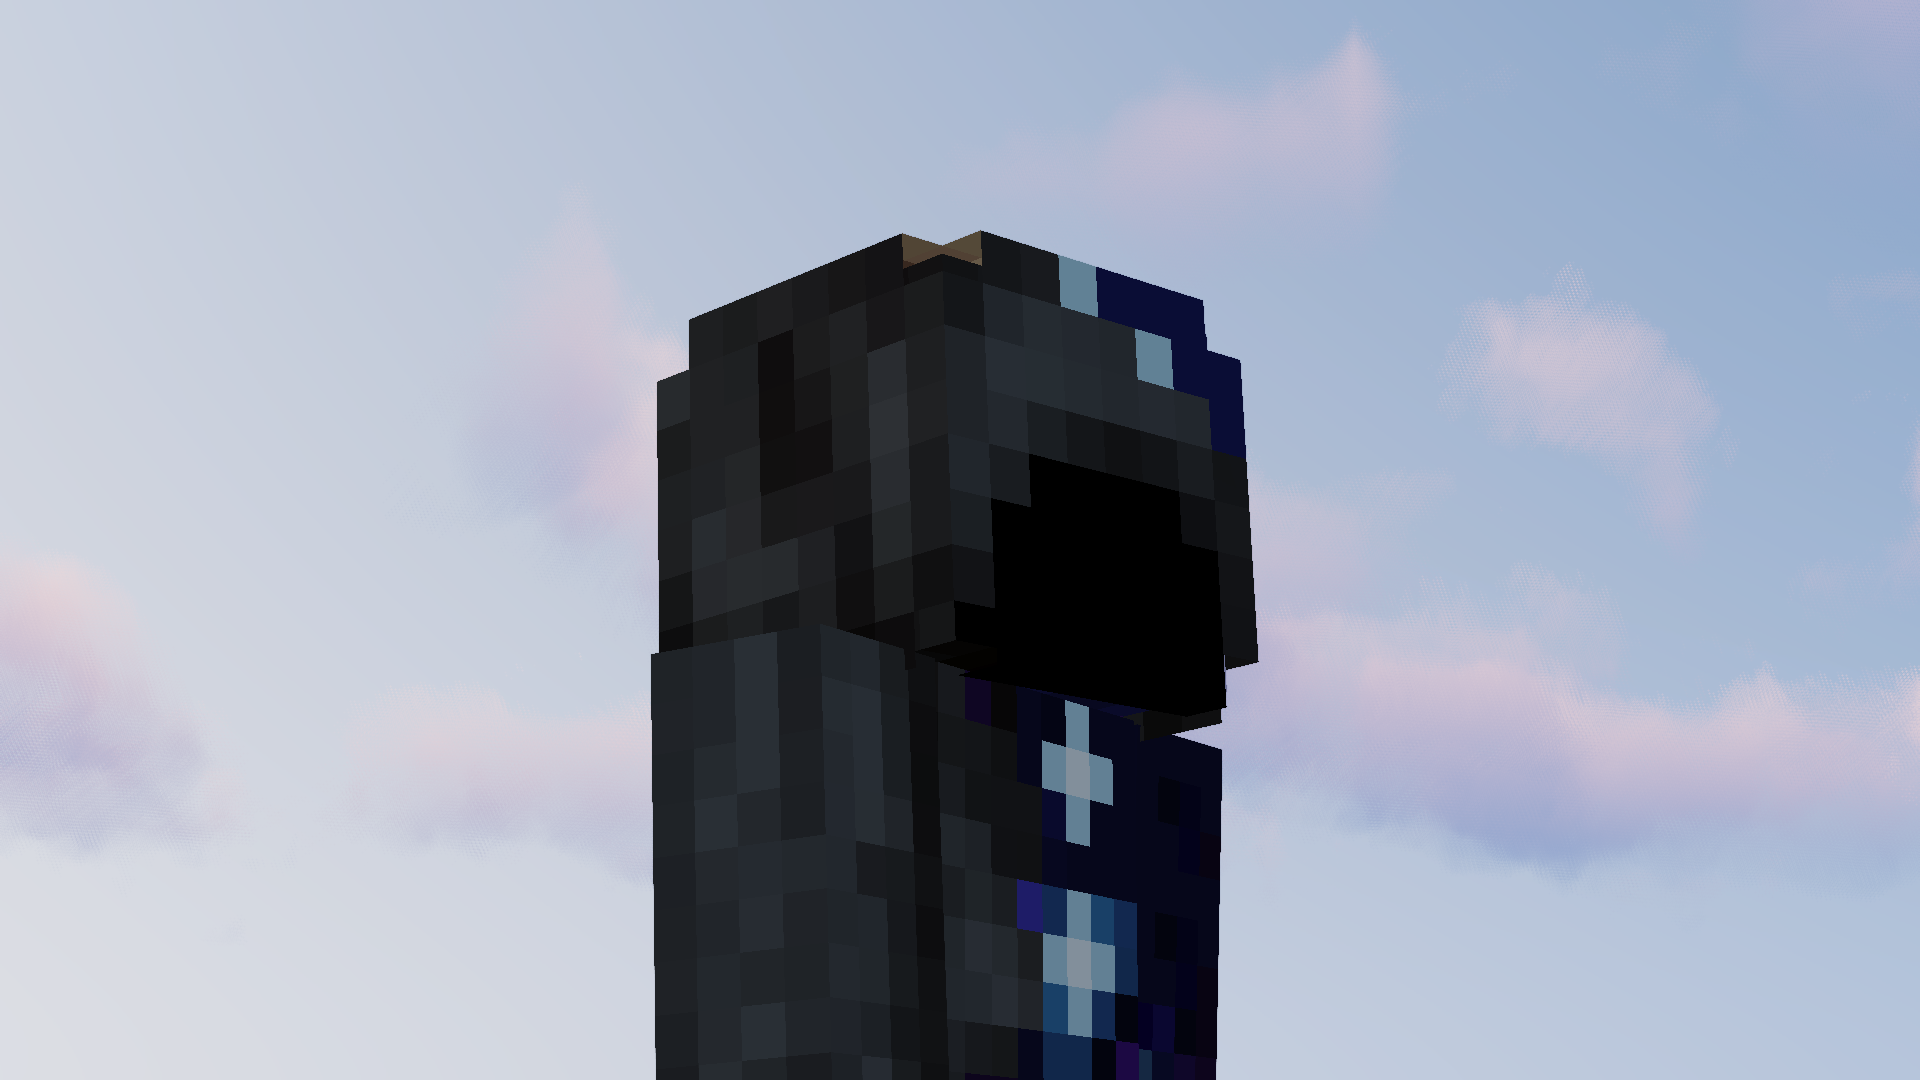 _galaxy_ghost_'s Profile Picture on PvPRP